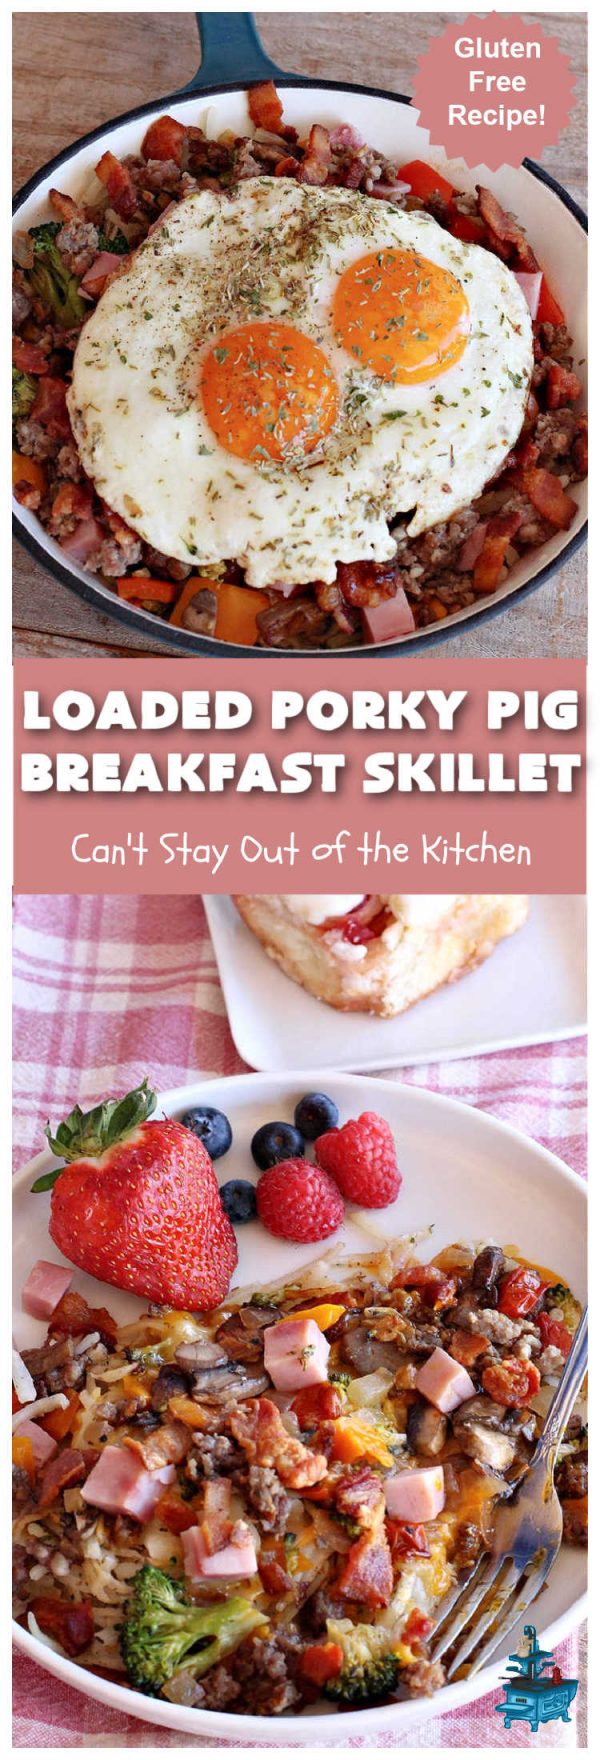 Loaded Porky Pig Breakfast Skillet – Can't Stay Out of the Kitchen